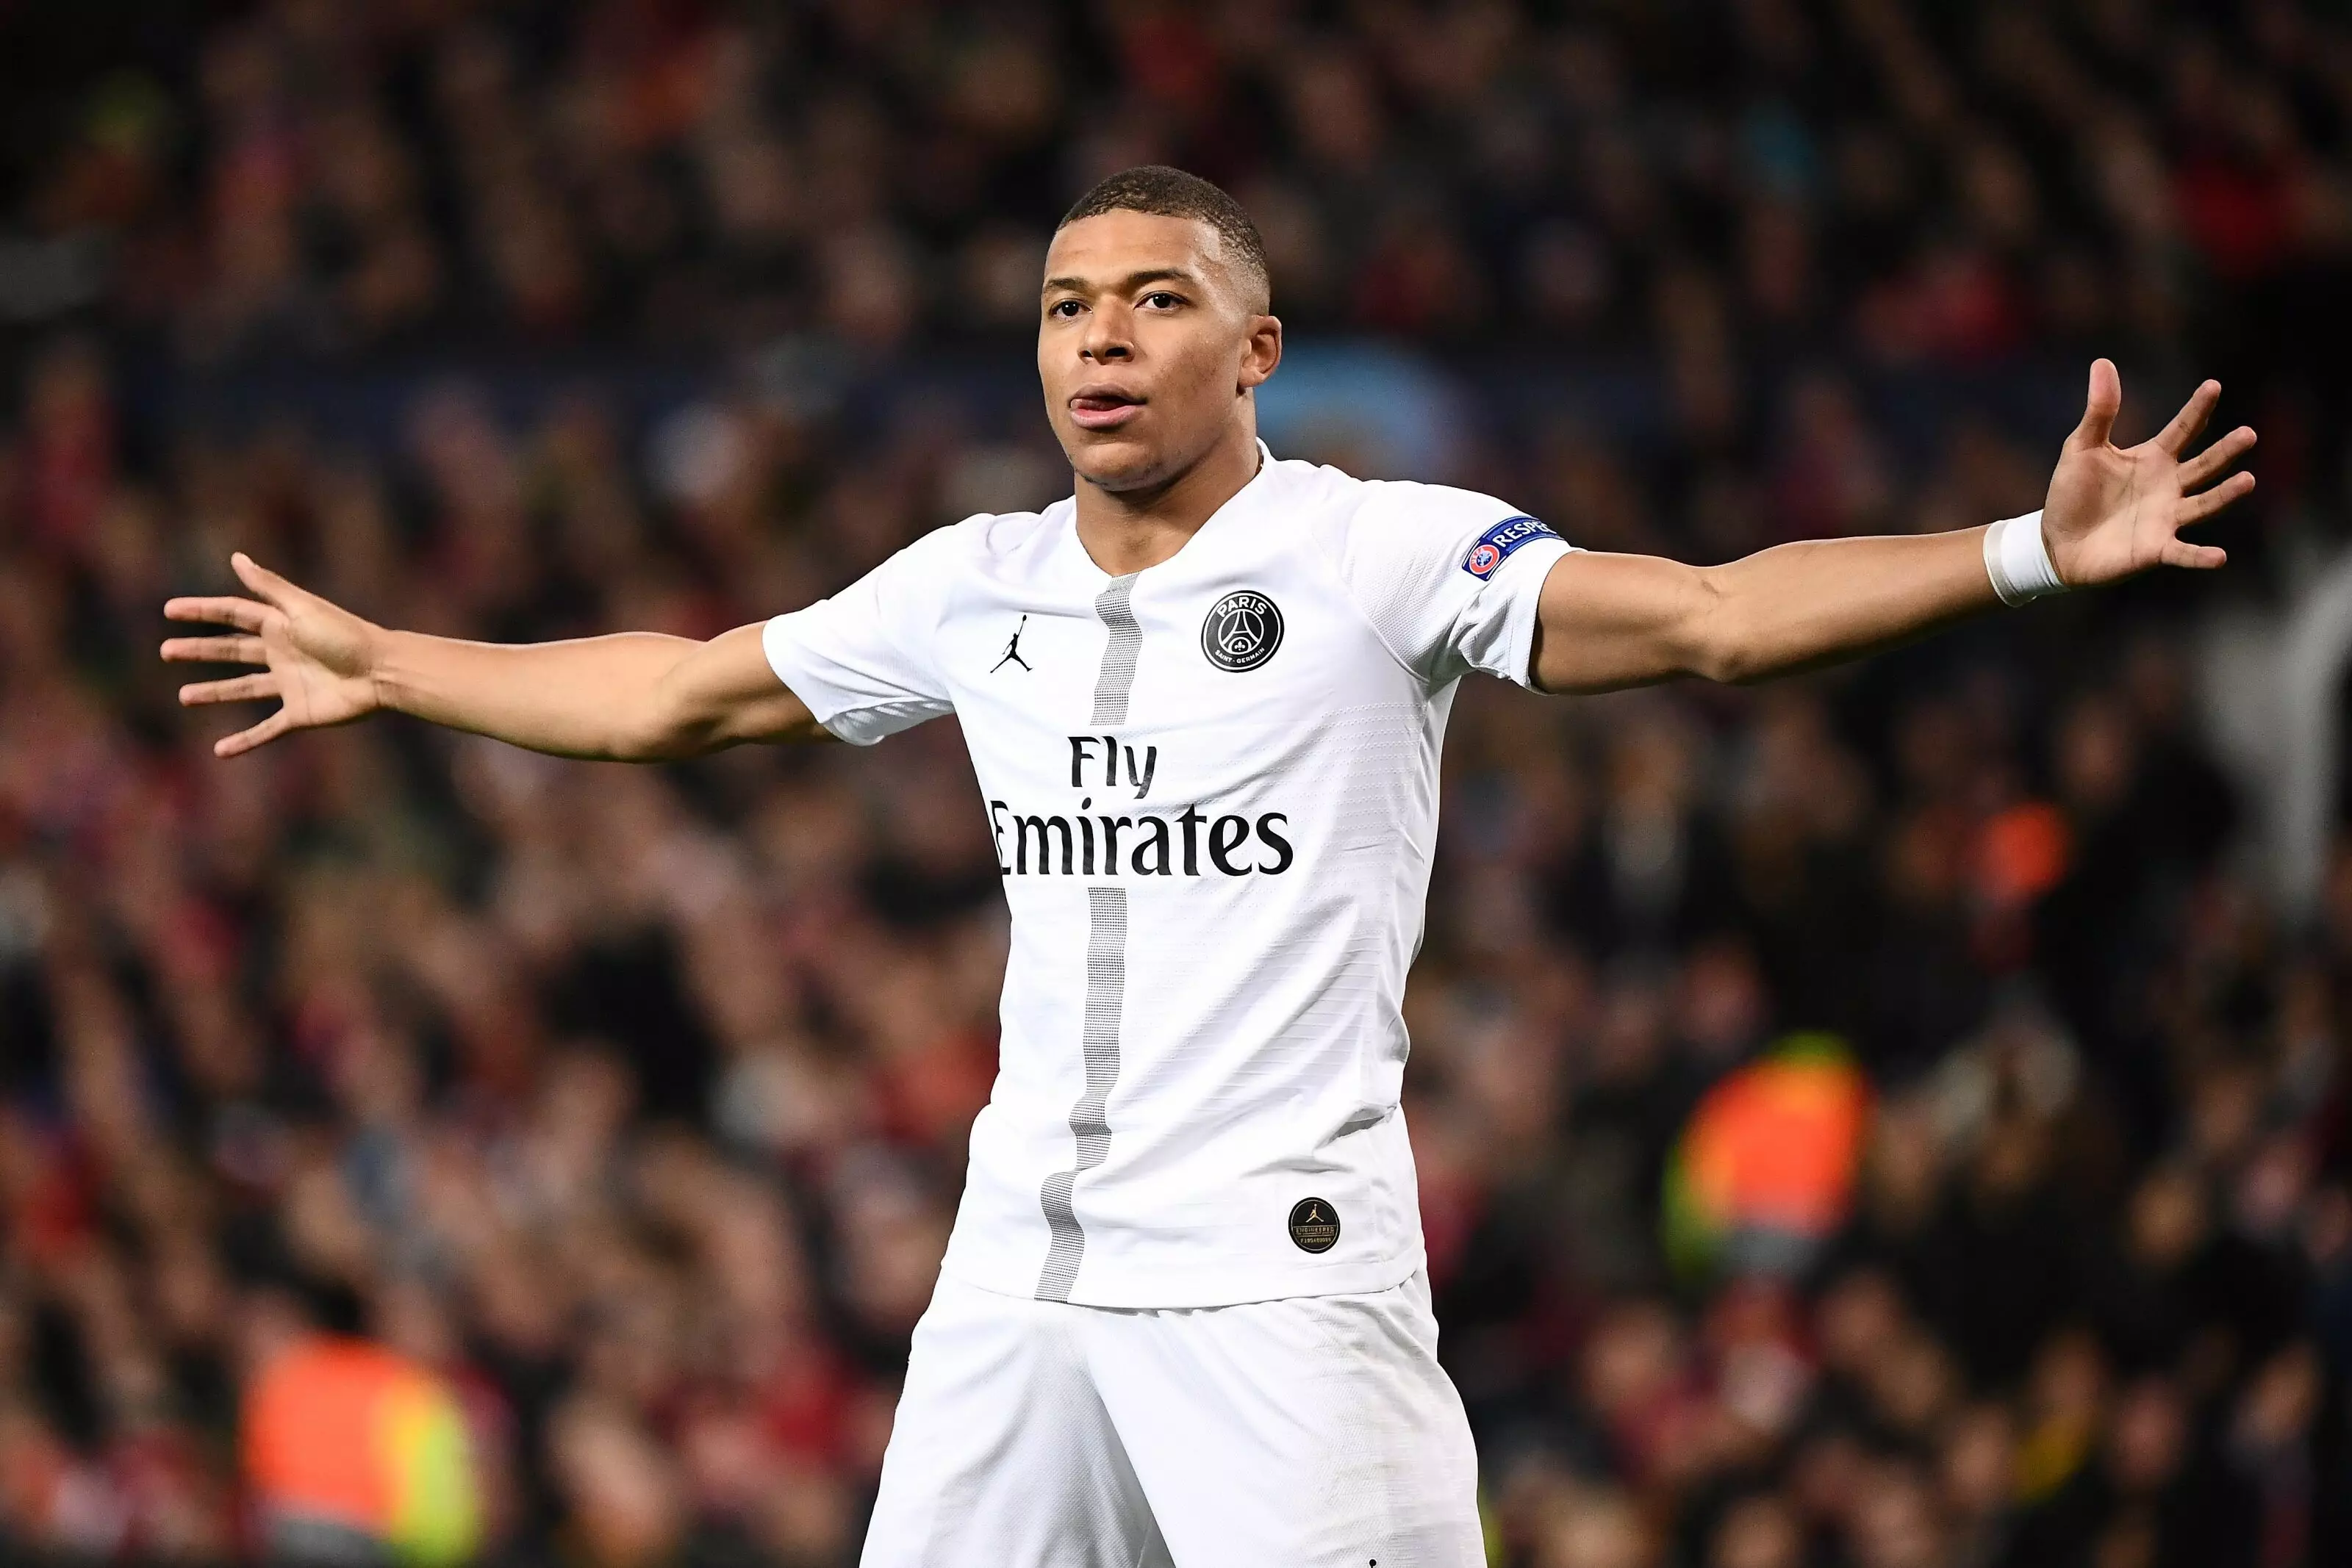 Kylian Mbappe will reject Paris Saint-Germain's latest contract offer to push a move to Real Madrid